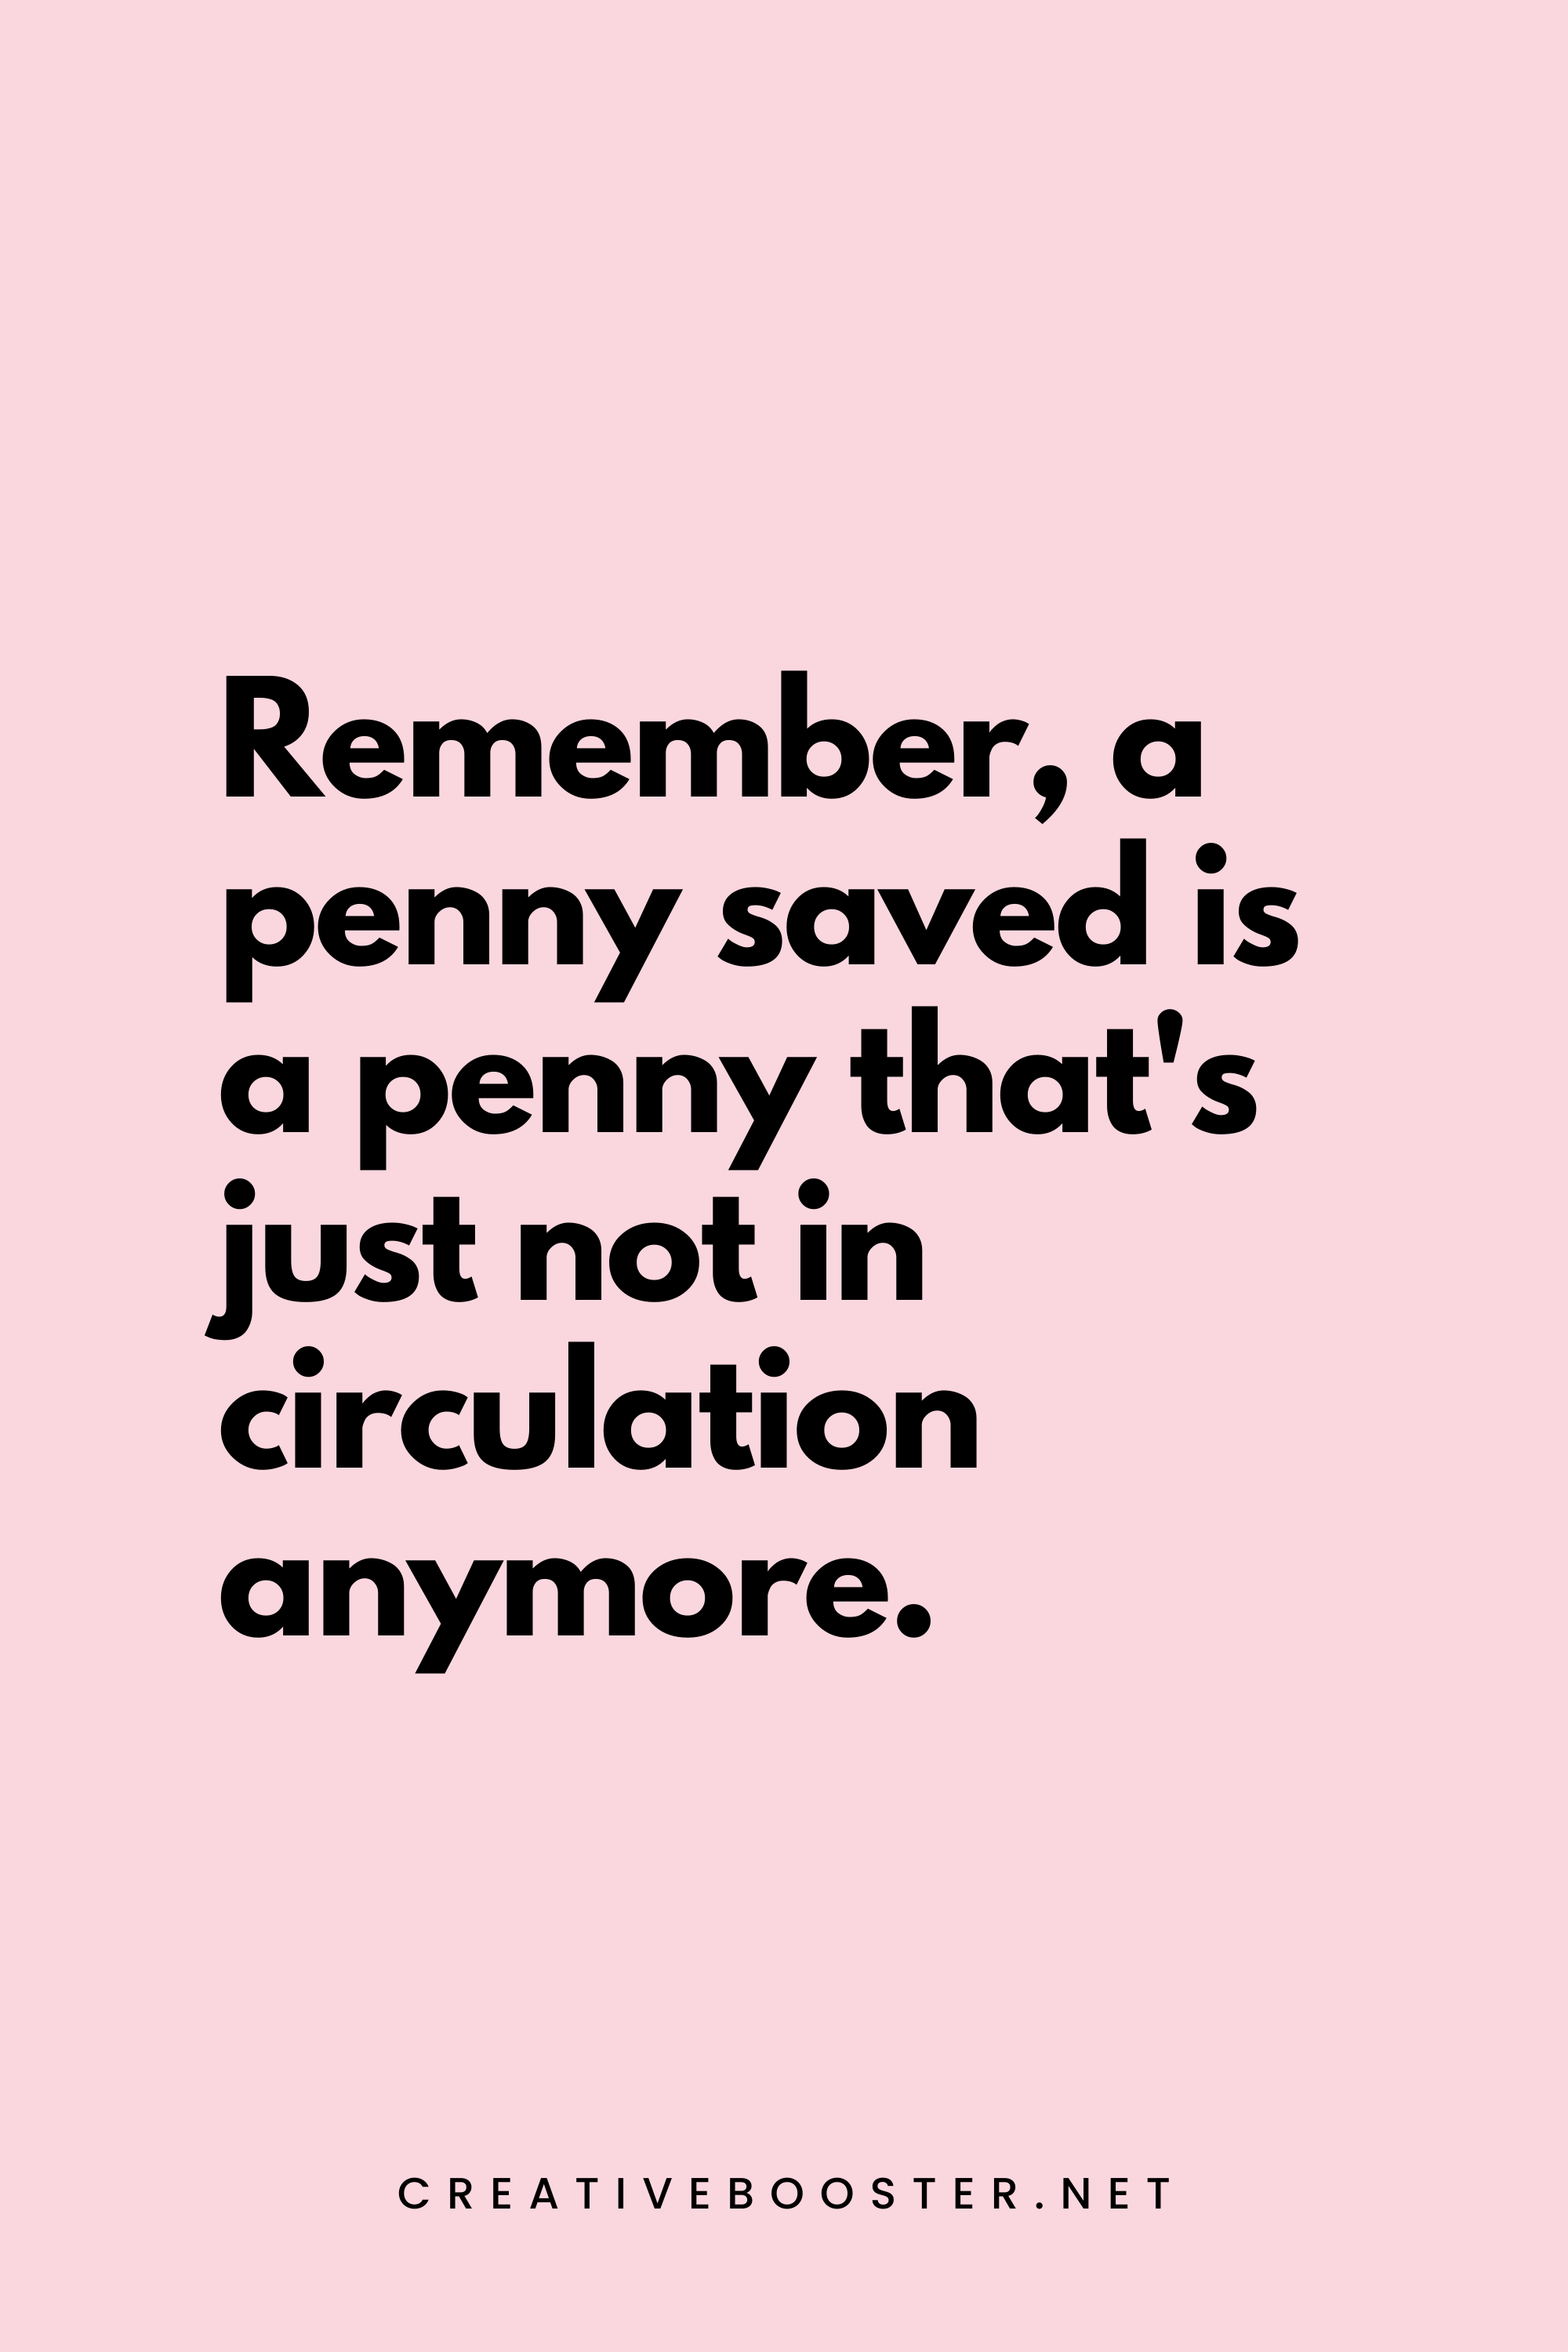 64. Remember, a penny saved is a penny that's just not in circulation anymore. - Creativebooster.net - 6. Funny Financial Freedom Quotes